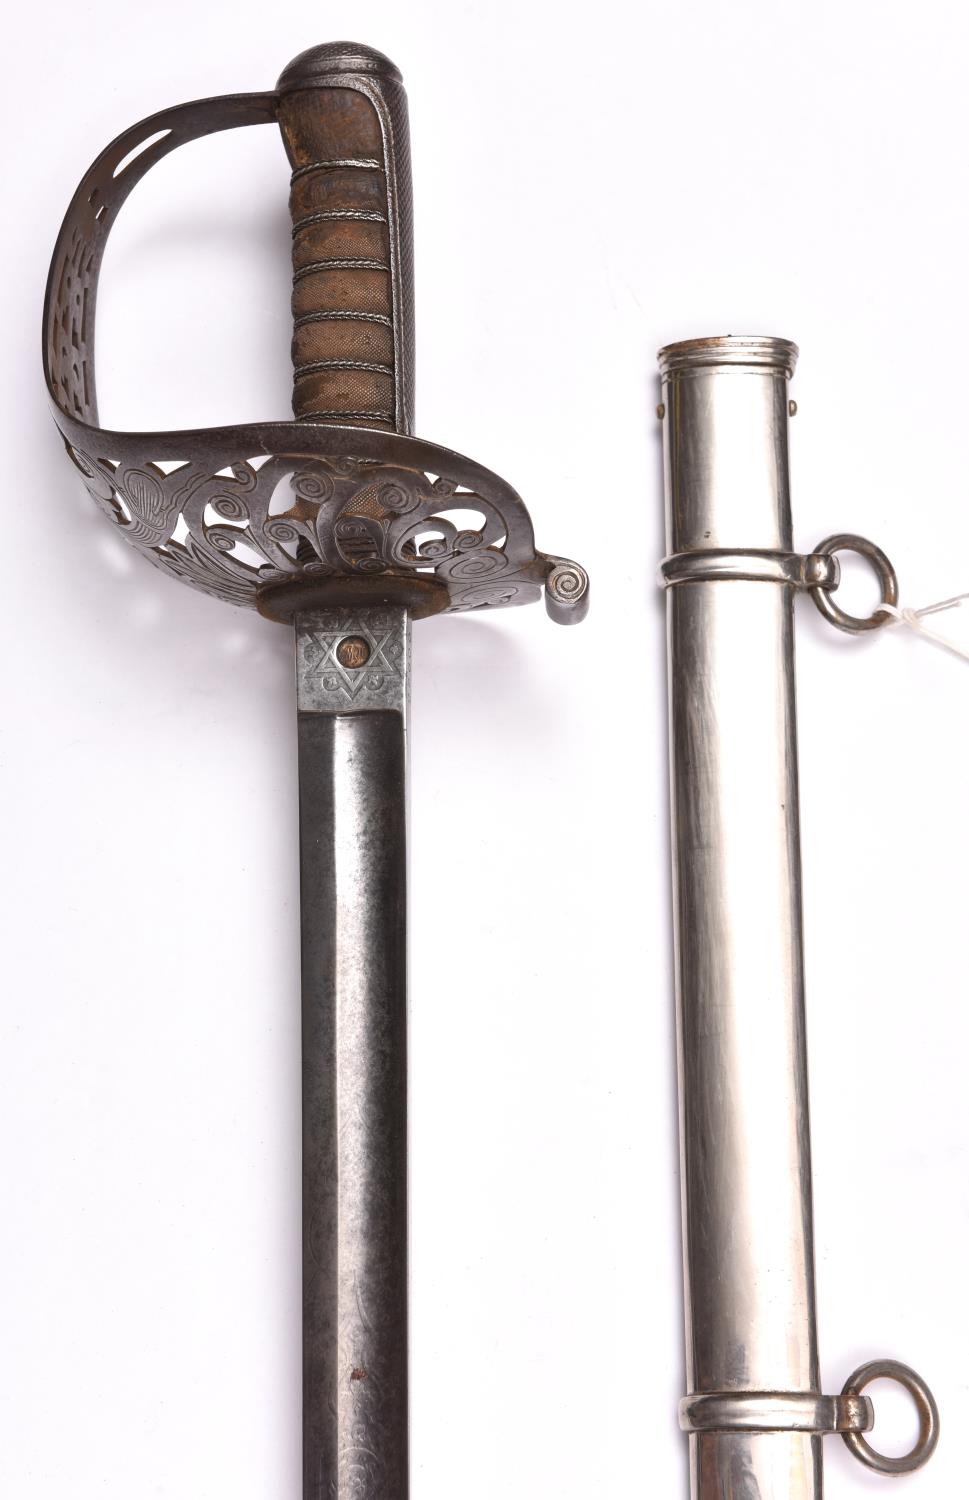 A Victorian 1821 pattern Cavalry officer’s sword, fullered blade 35”, by Henry Wilkinson, Pall Mall,